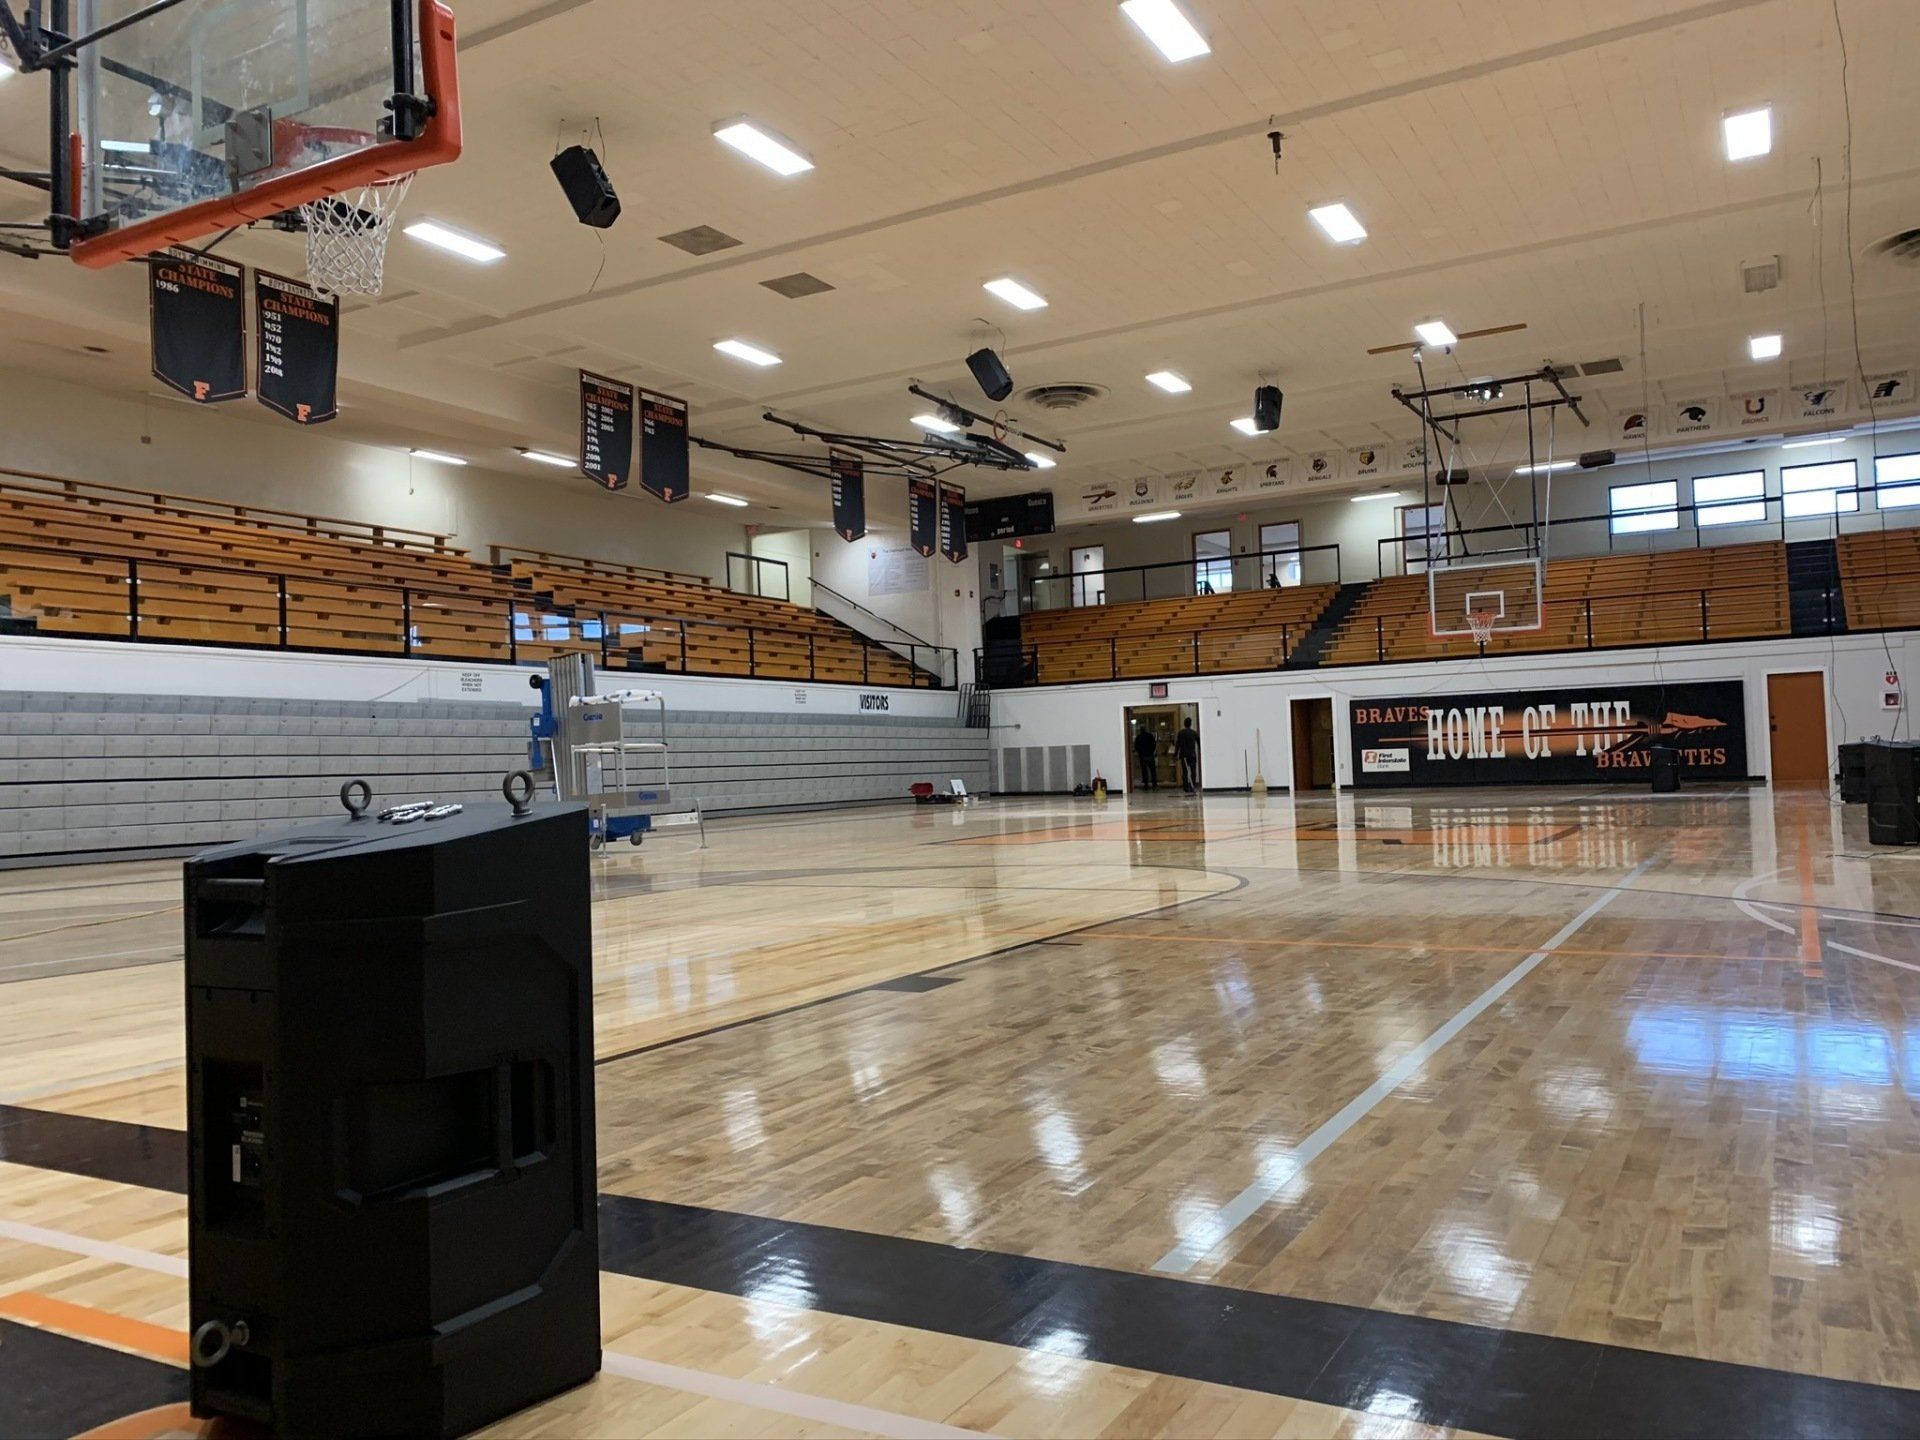 An empty basketball court in a gym with a speaker in the foreground